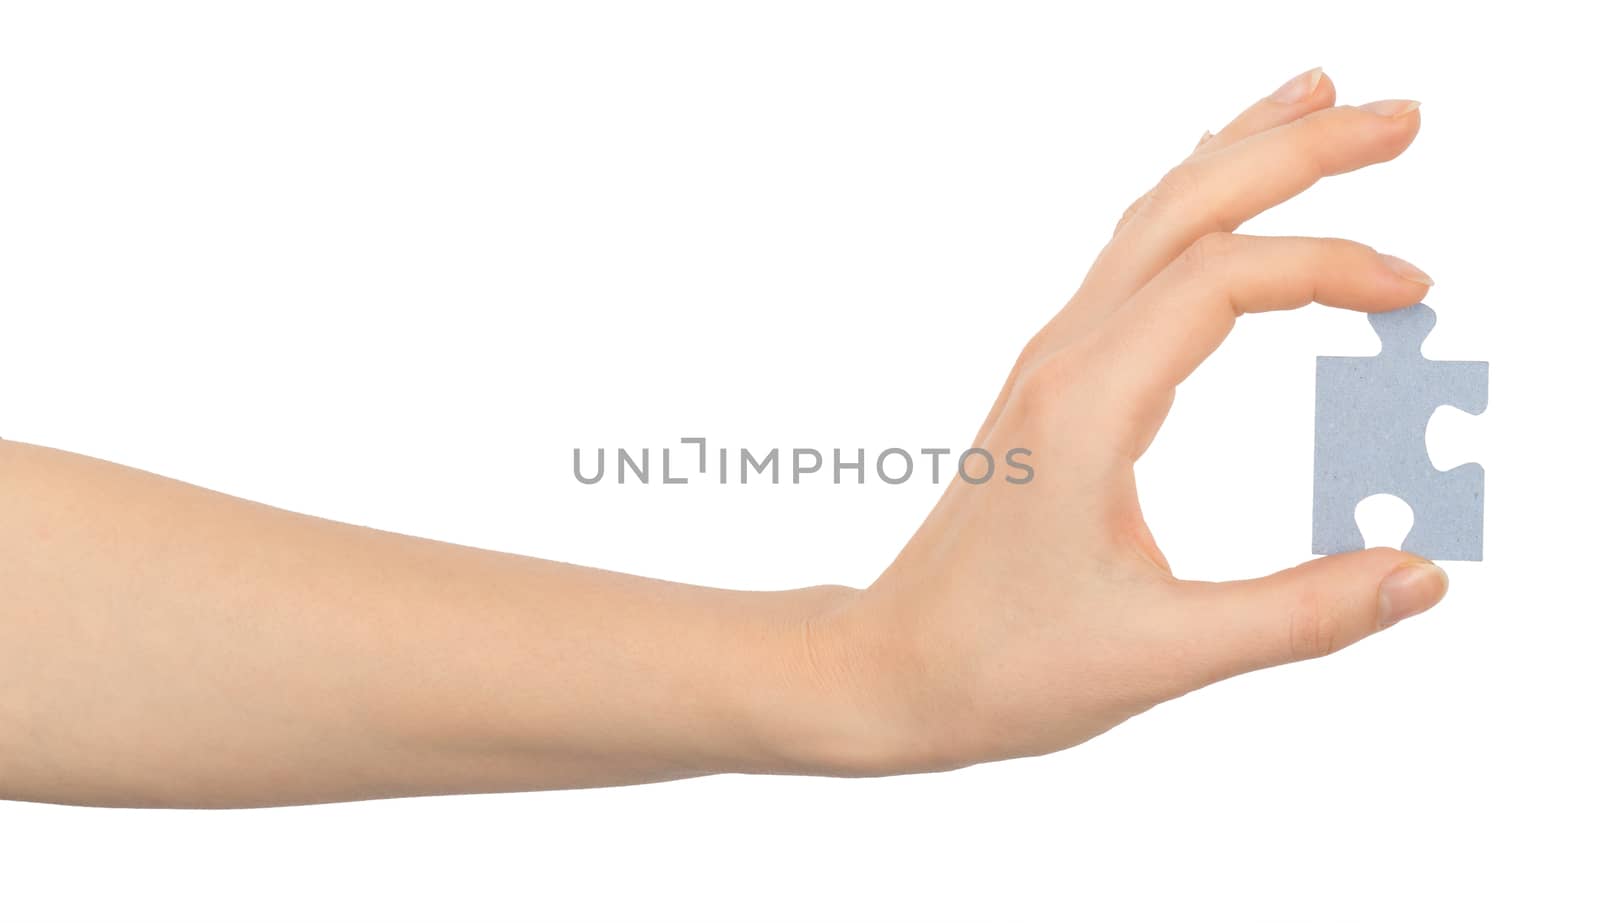 Hand holding puzzle piece on isolated white background